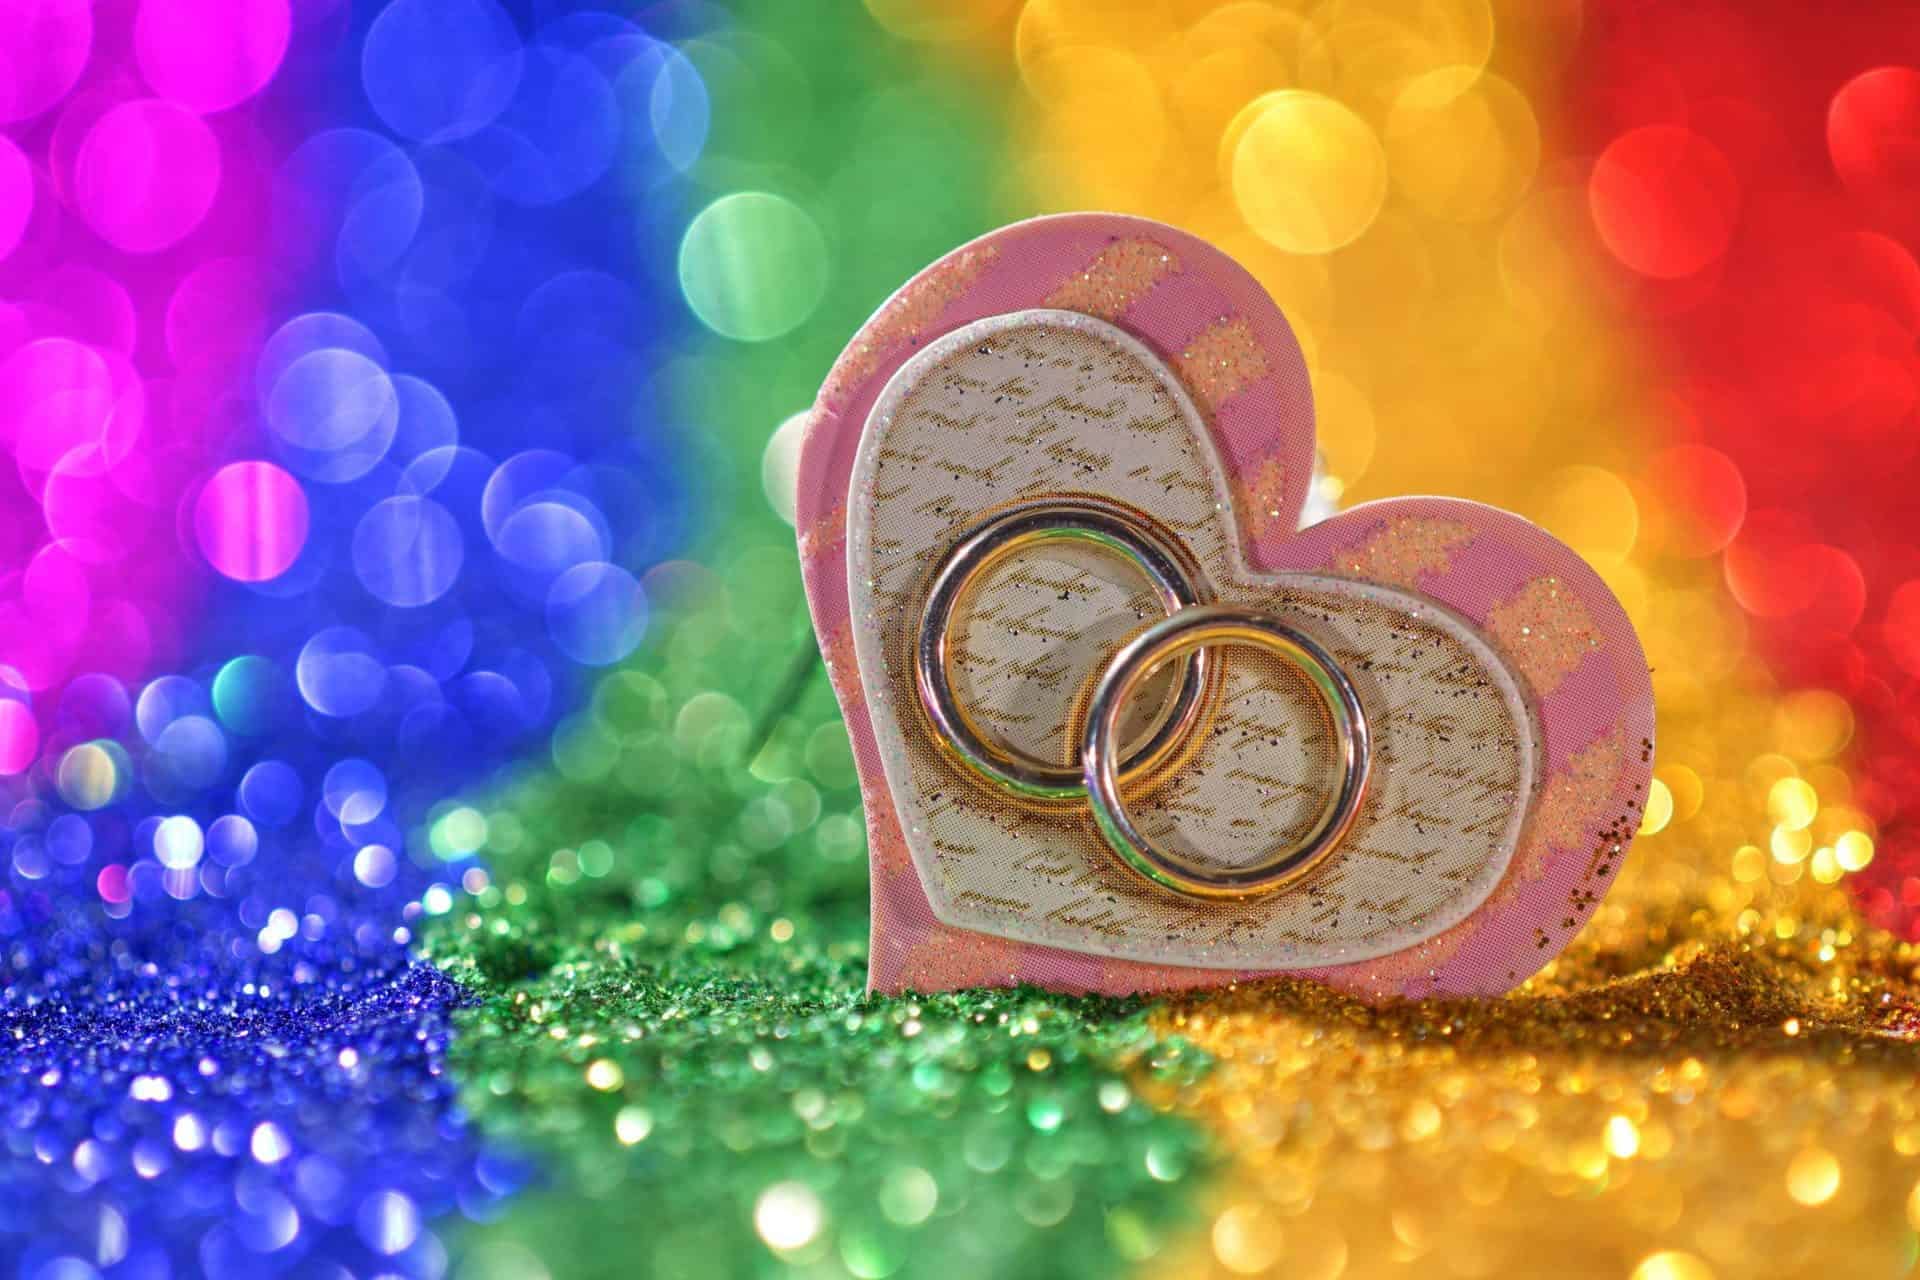 officiant-directory-lgbtq+wedding-officiants-#1-guide-love-is-love